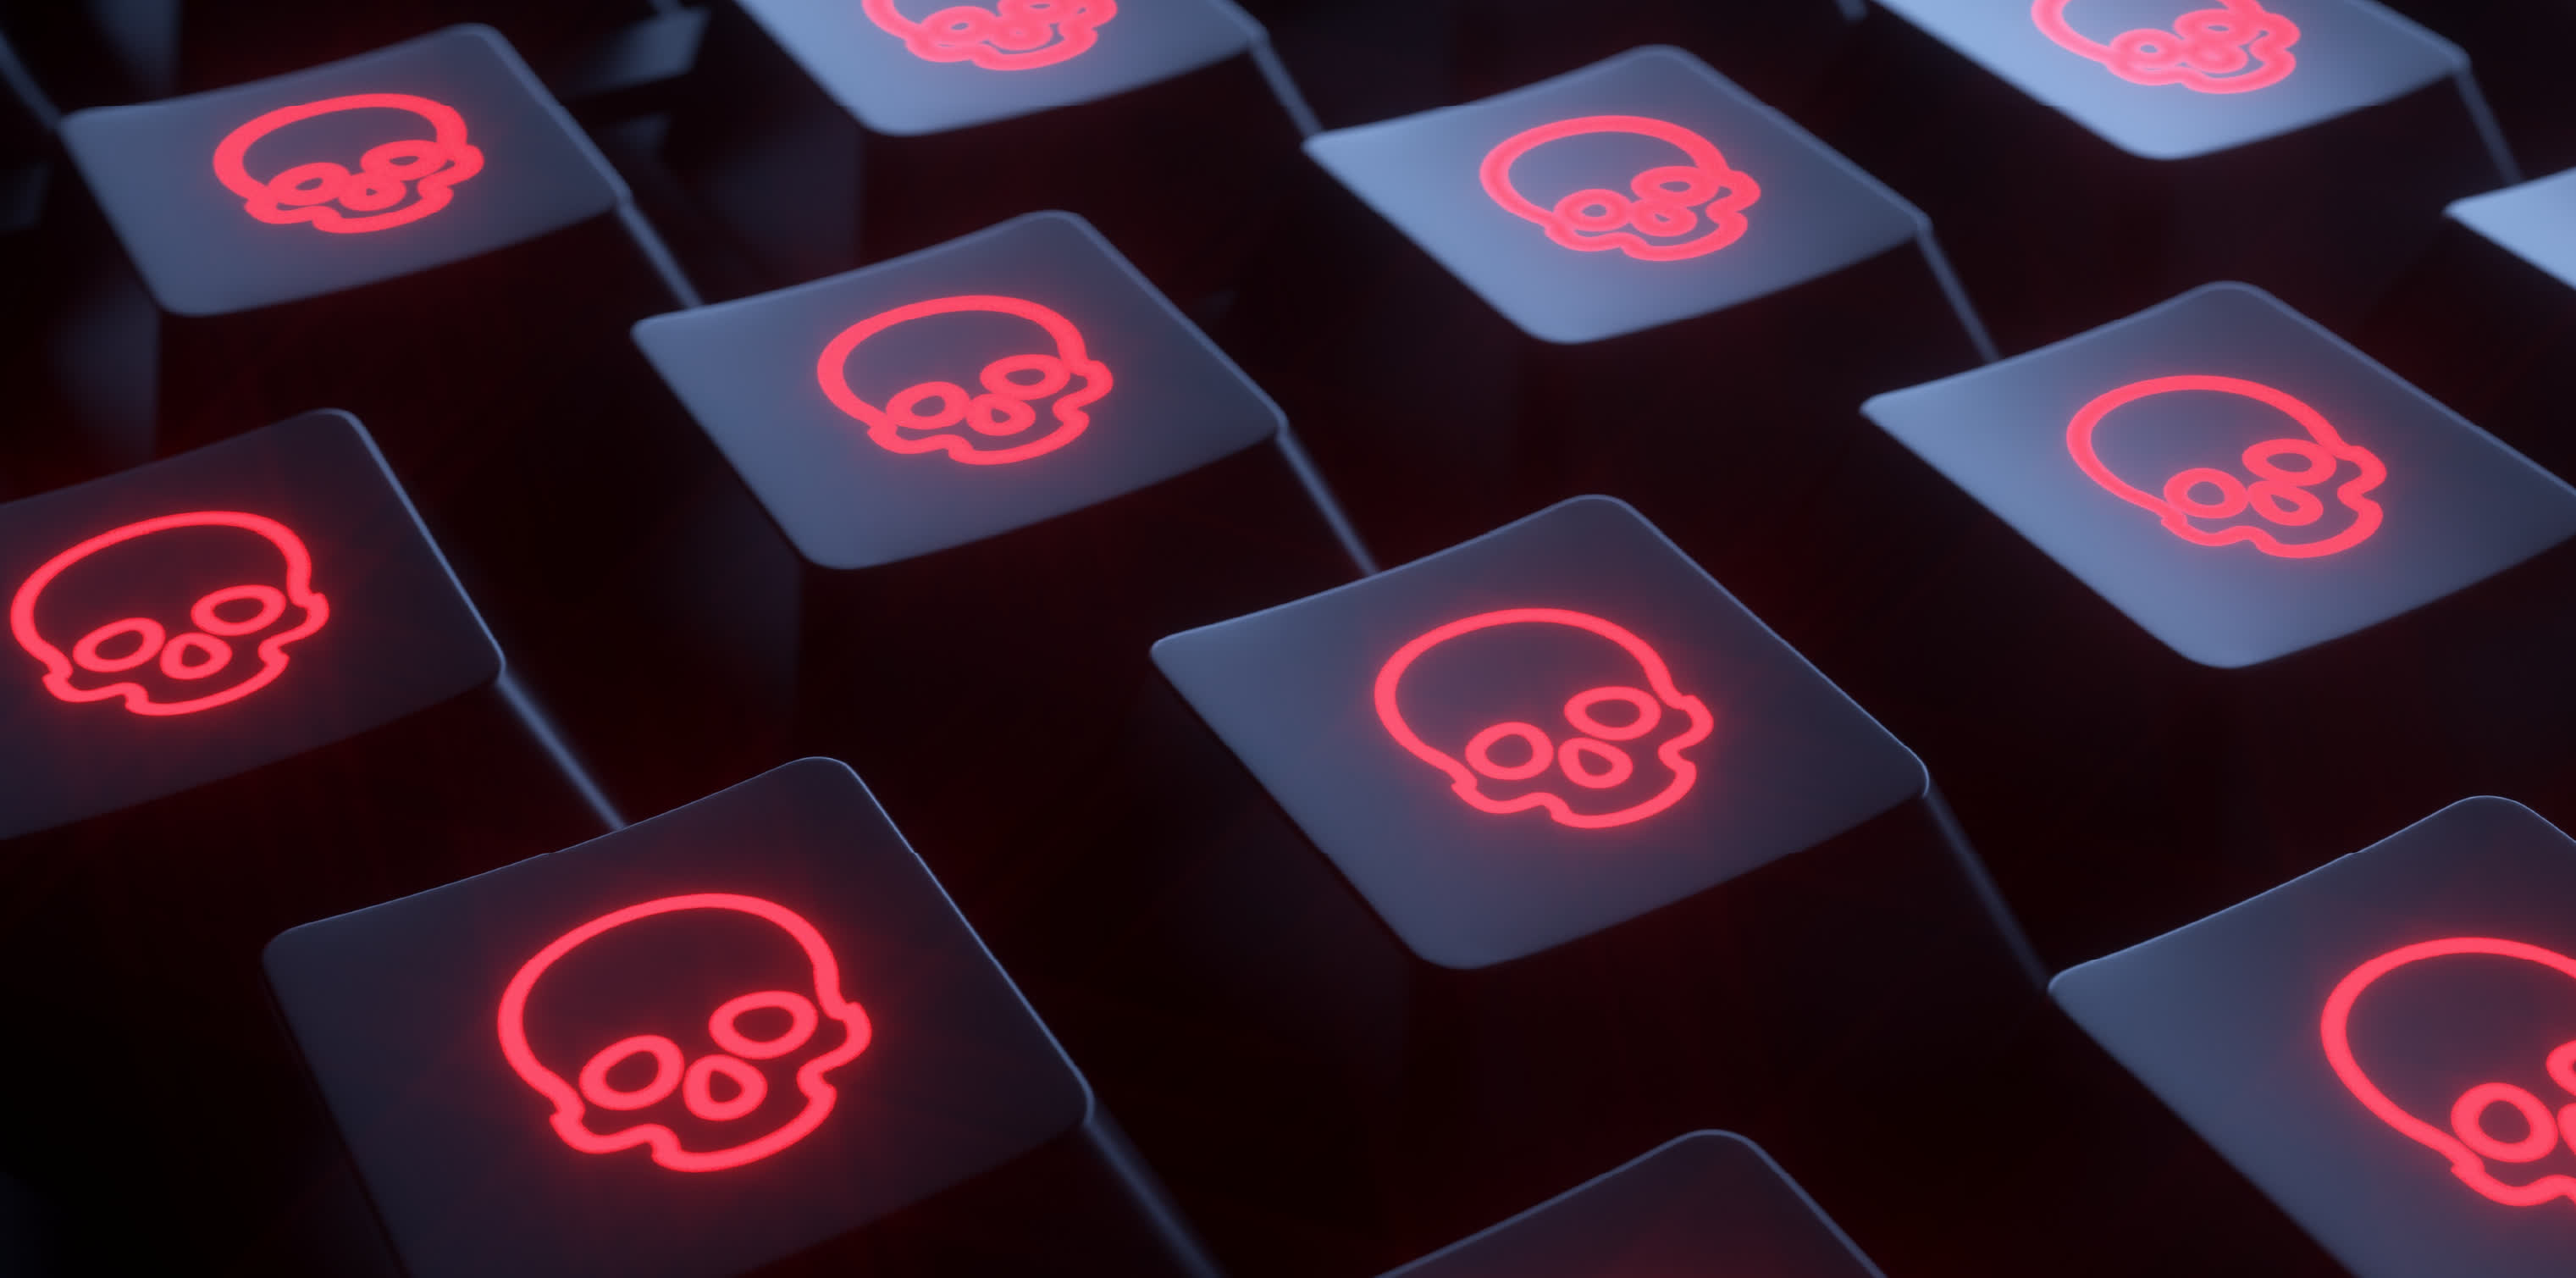 Ransomware attacks are only getting worse, DarkSide group quits, but that may just be a strategy